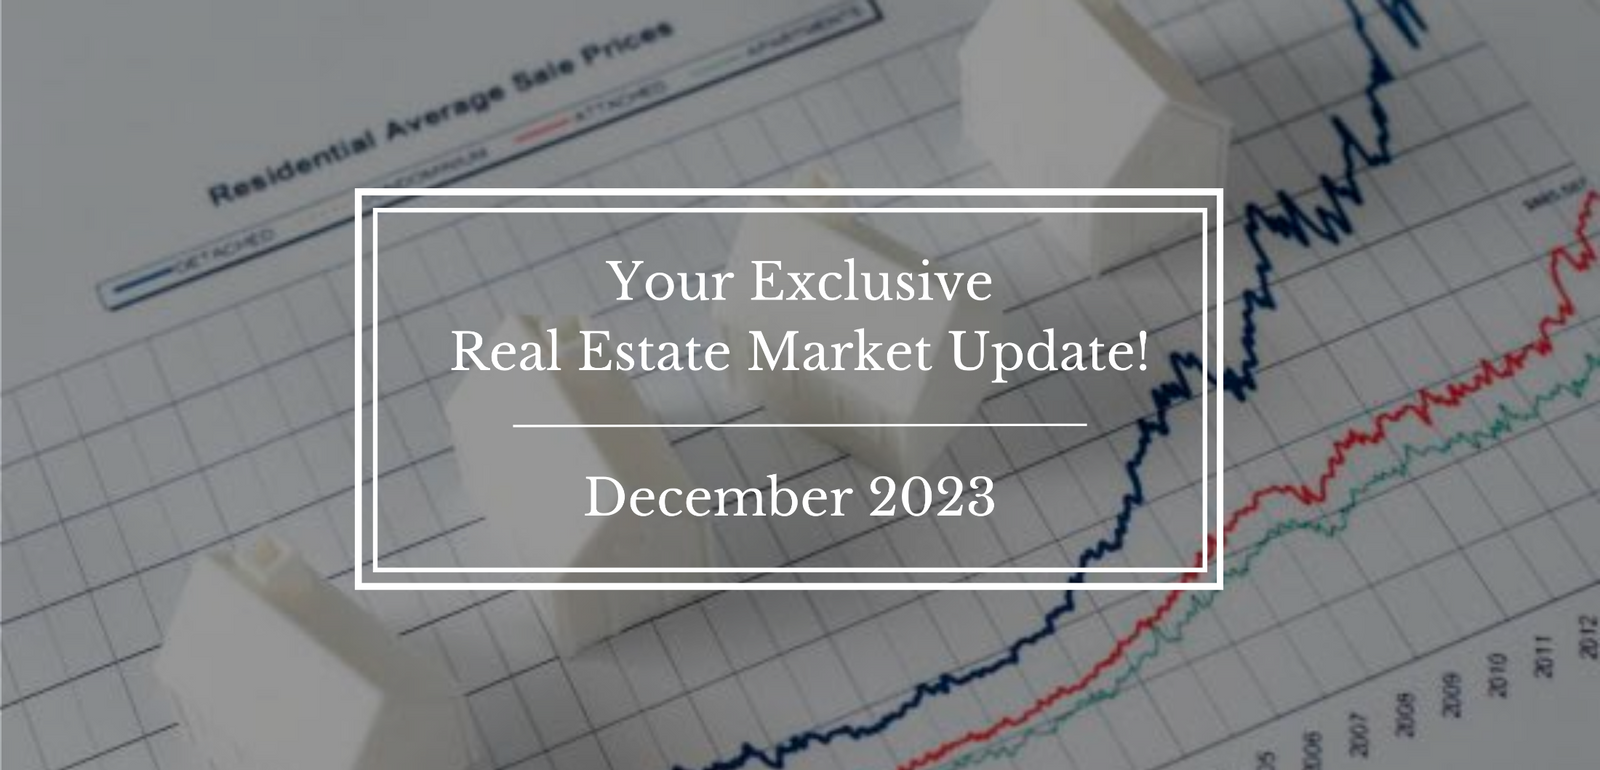 Ottawa MLS® December Home Sales Close Out Year in Steady State.